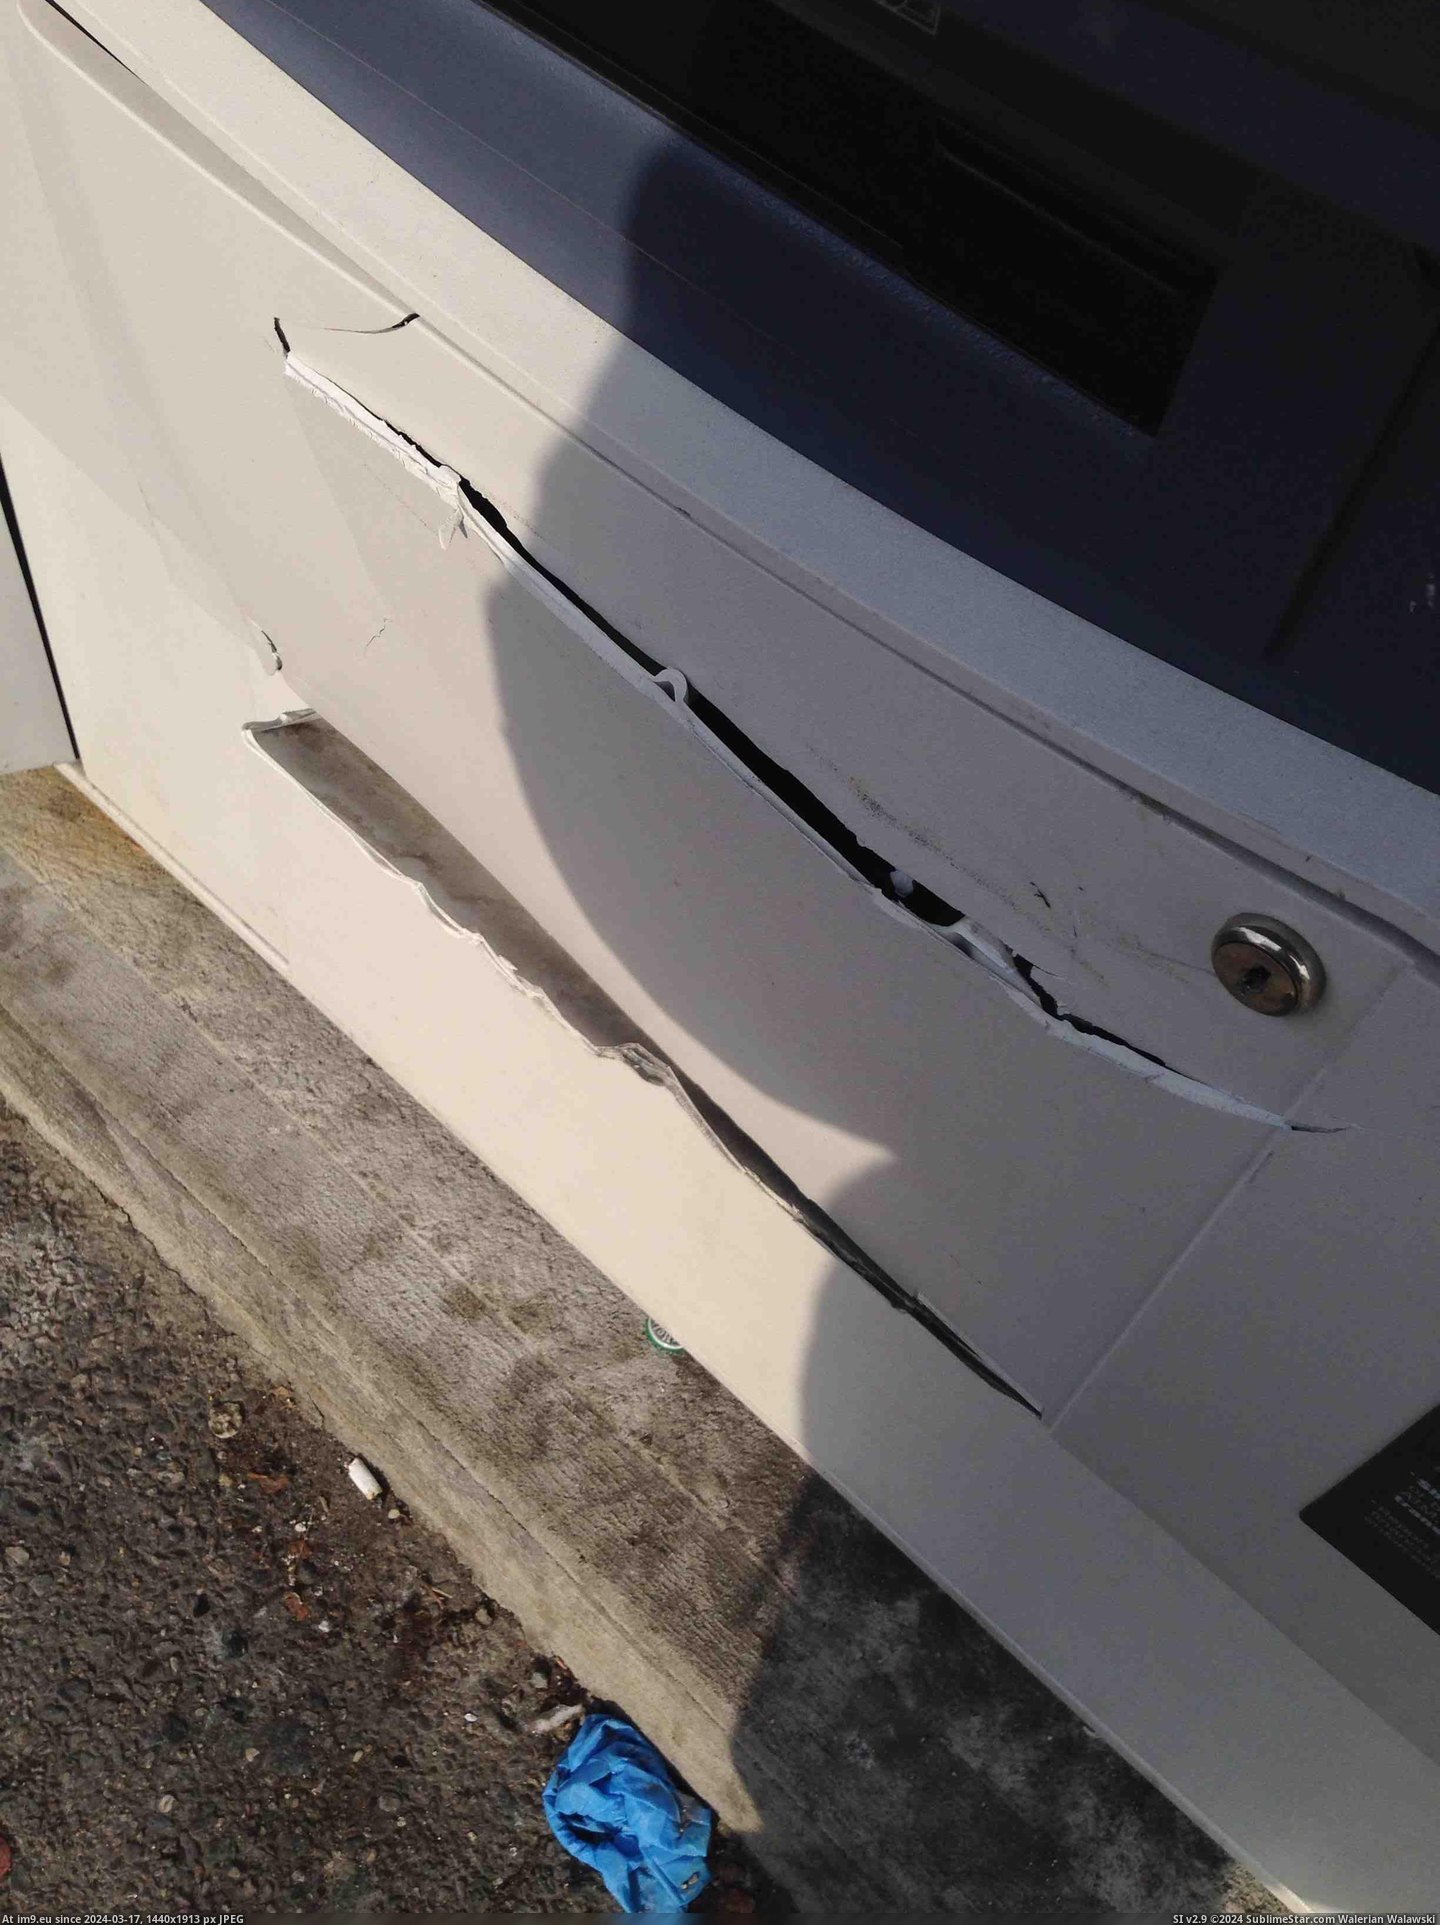 #Work #Break #Tech #Crowbar #Atm #Machine [Mildlyinteresting] I work as an ATM tech and someone tried to break into a machine with a crowbar Pic. (Image of album My r/MILDLYINTERESTING favs))